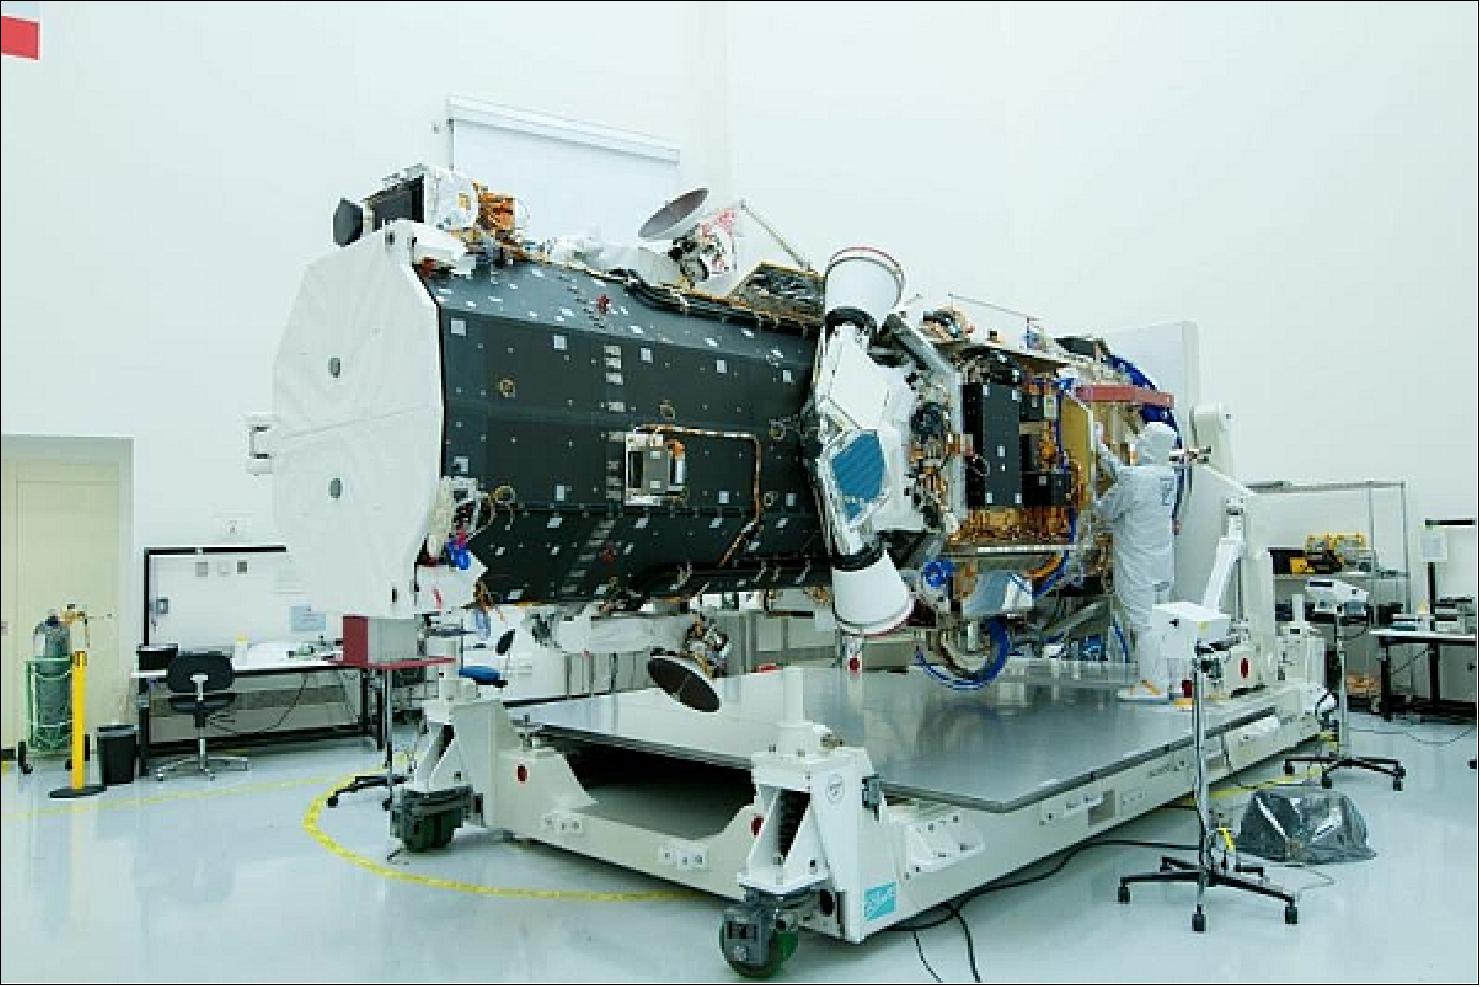 Figure 3: Photo of the WorldView-3 spacecraft during AIT (Assembly, Integration and Test) phase at BATC (image credit: BATC) 10)